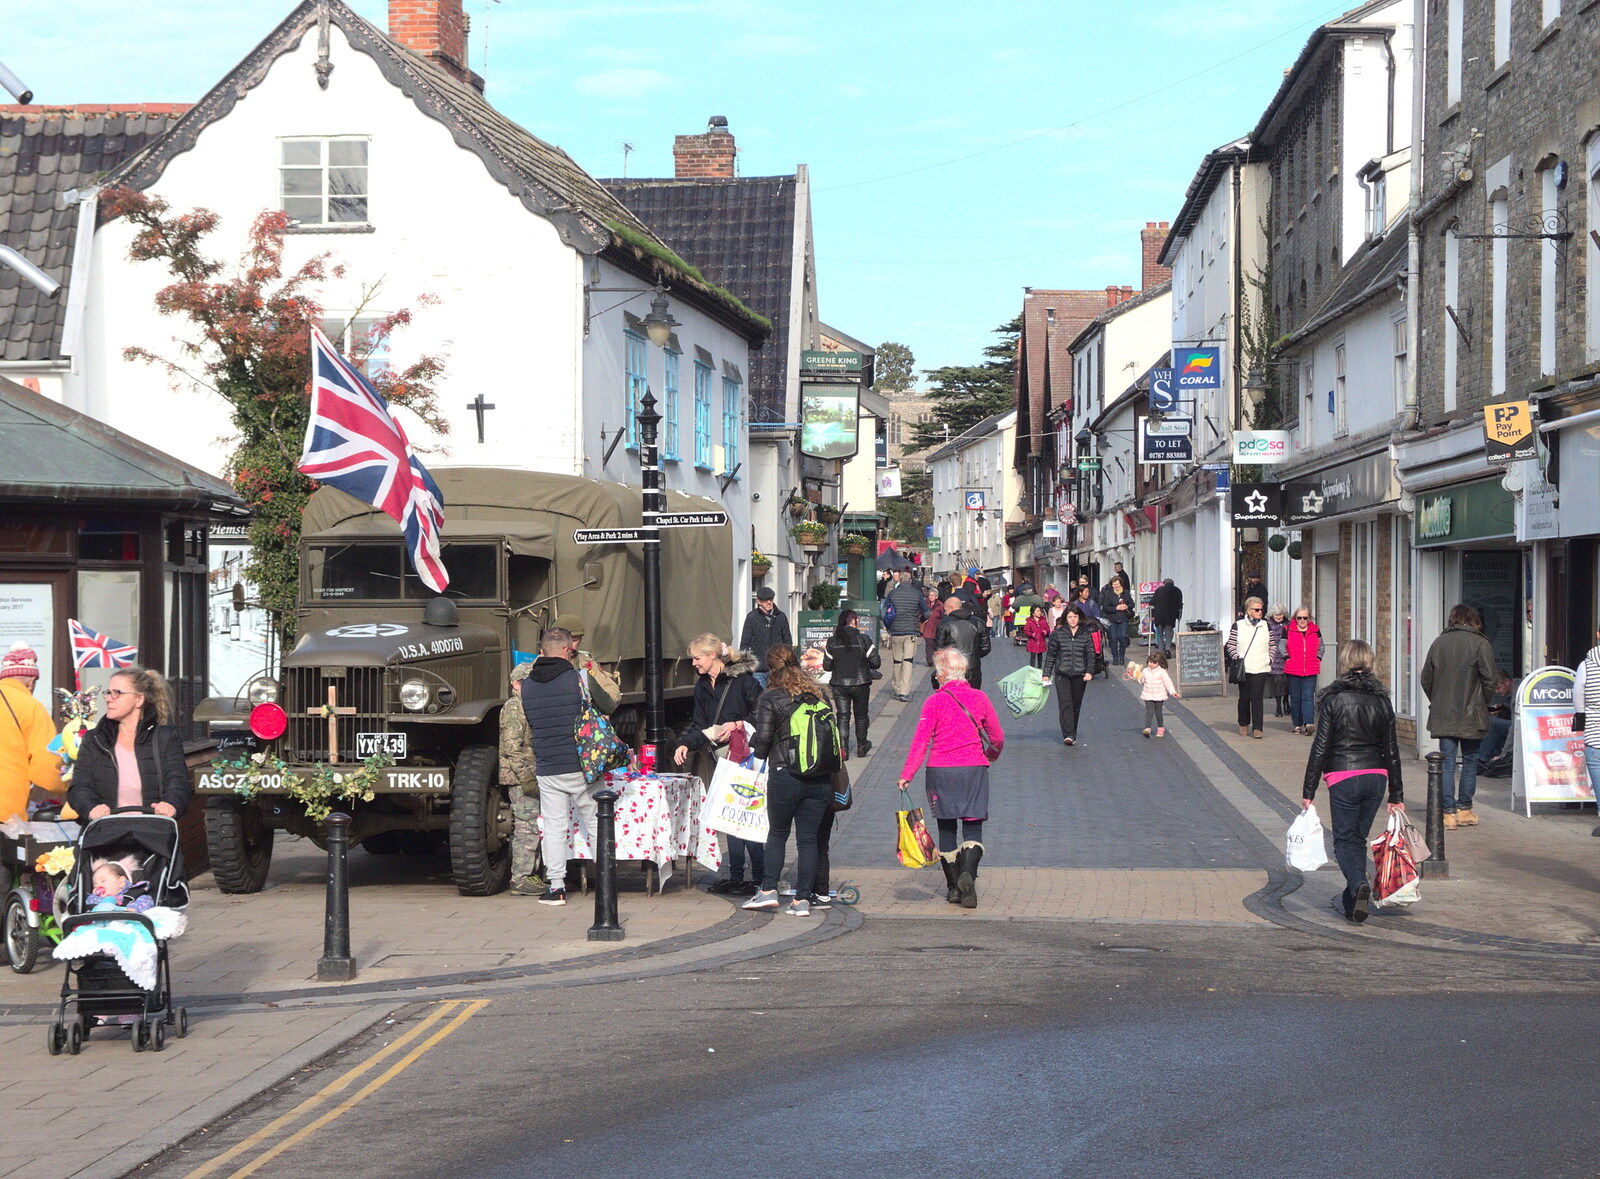 Mere Street in Diss is busy on a Saturday morning from Apples and Fireworks, Carleton Rode and Palgrave, Suffolk - 4th November 2018